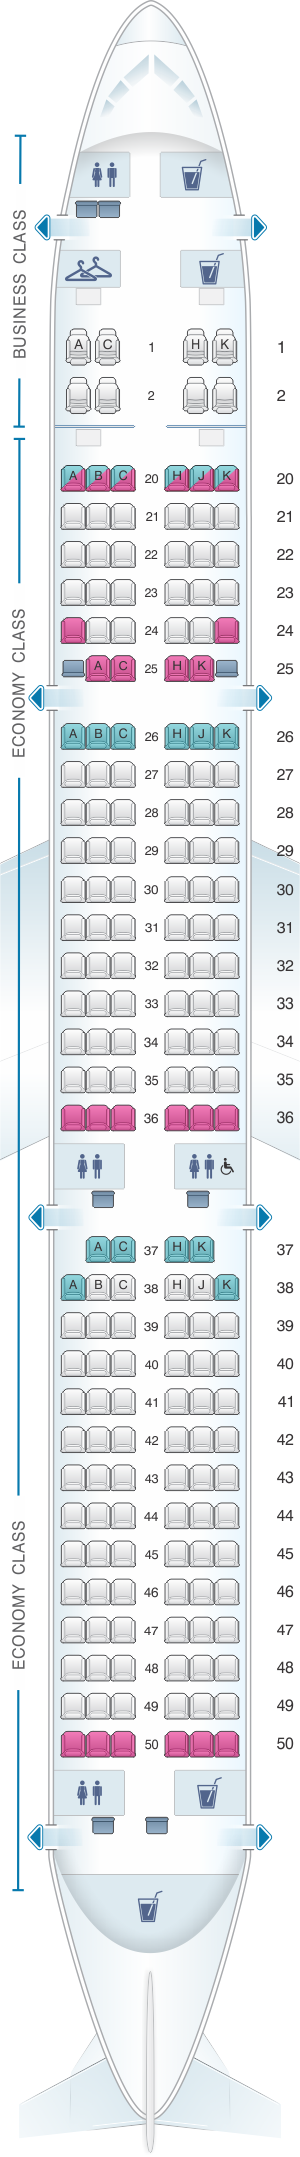 Seat map for EVA Air Airbus A321 200